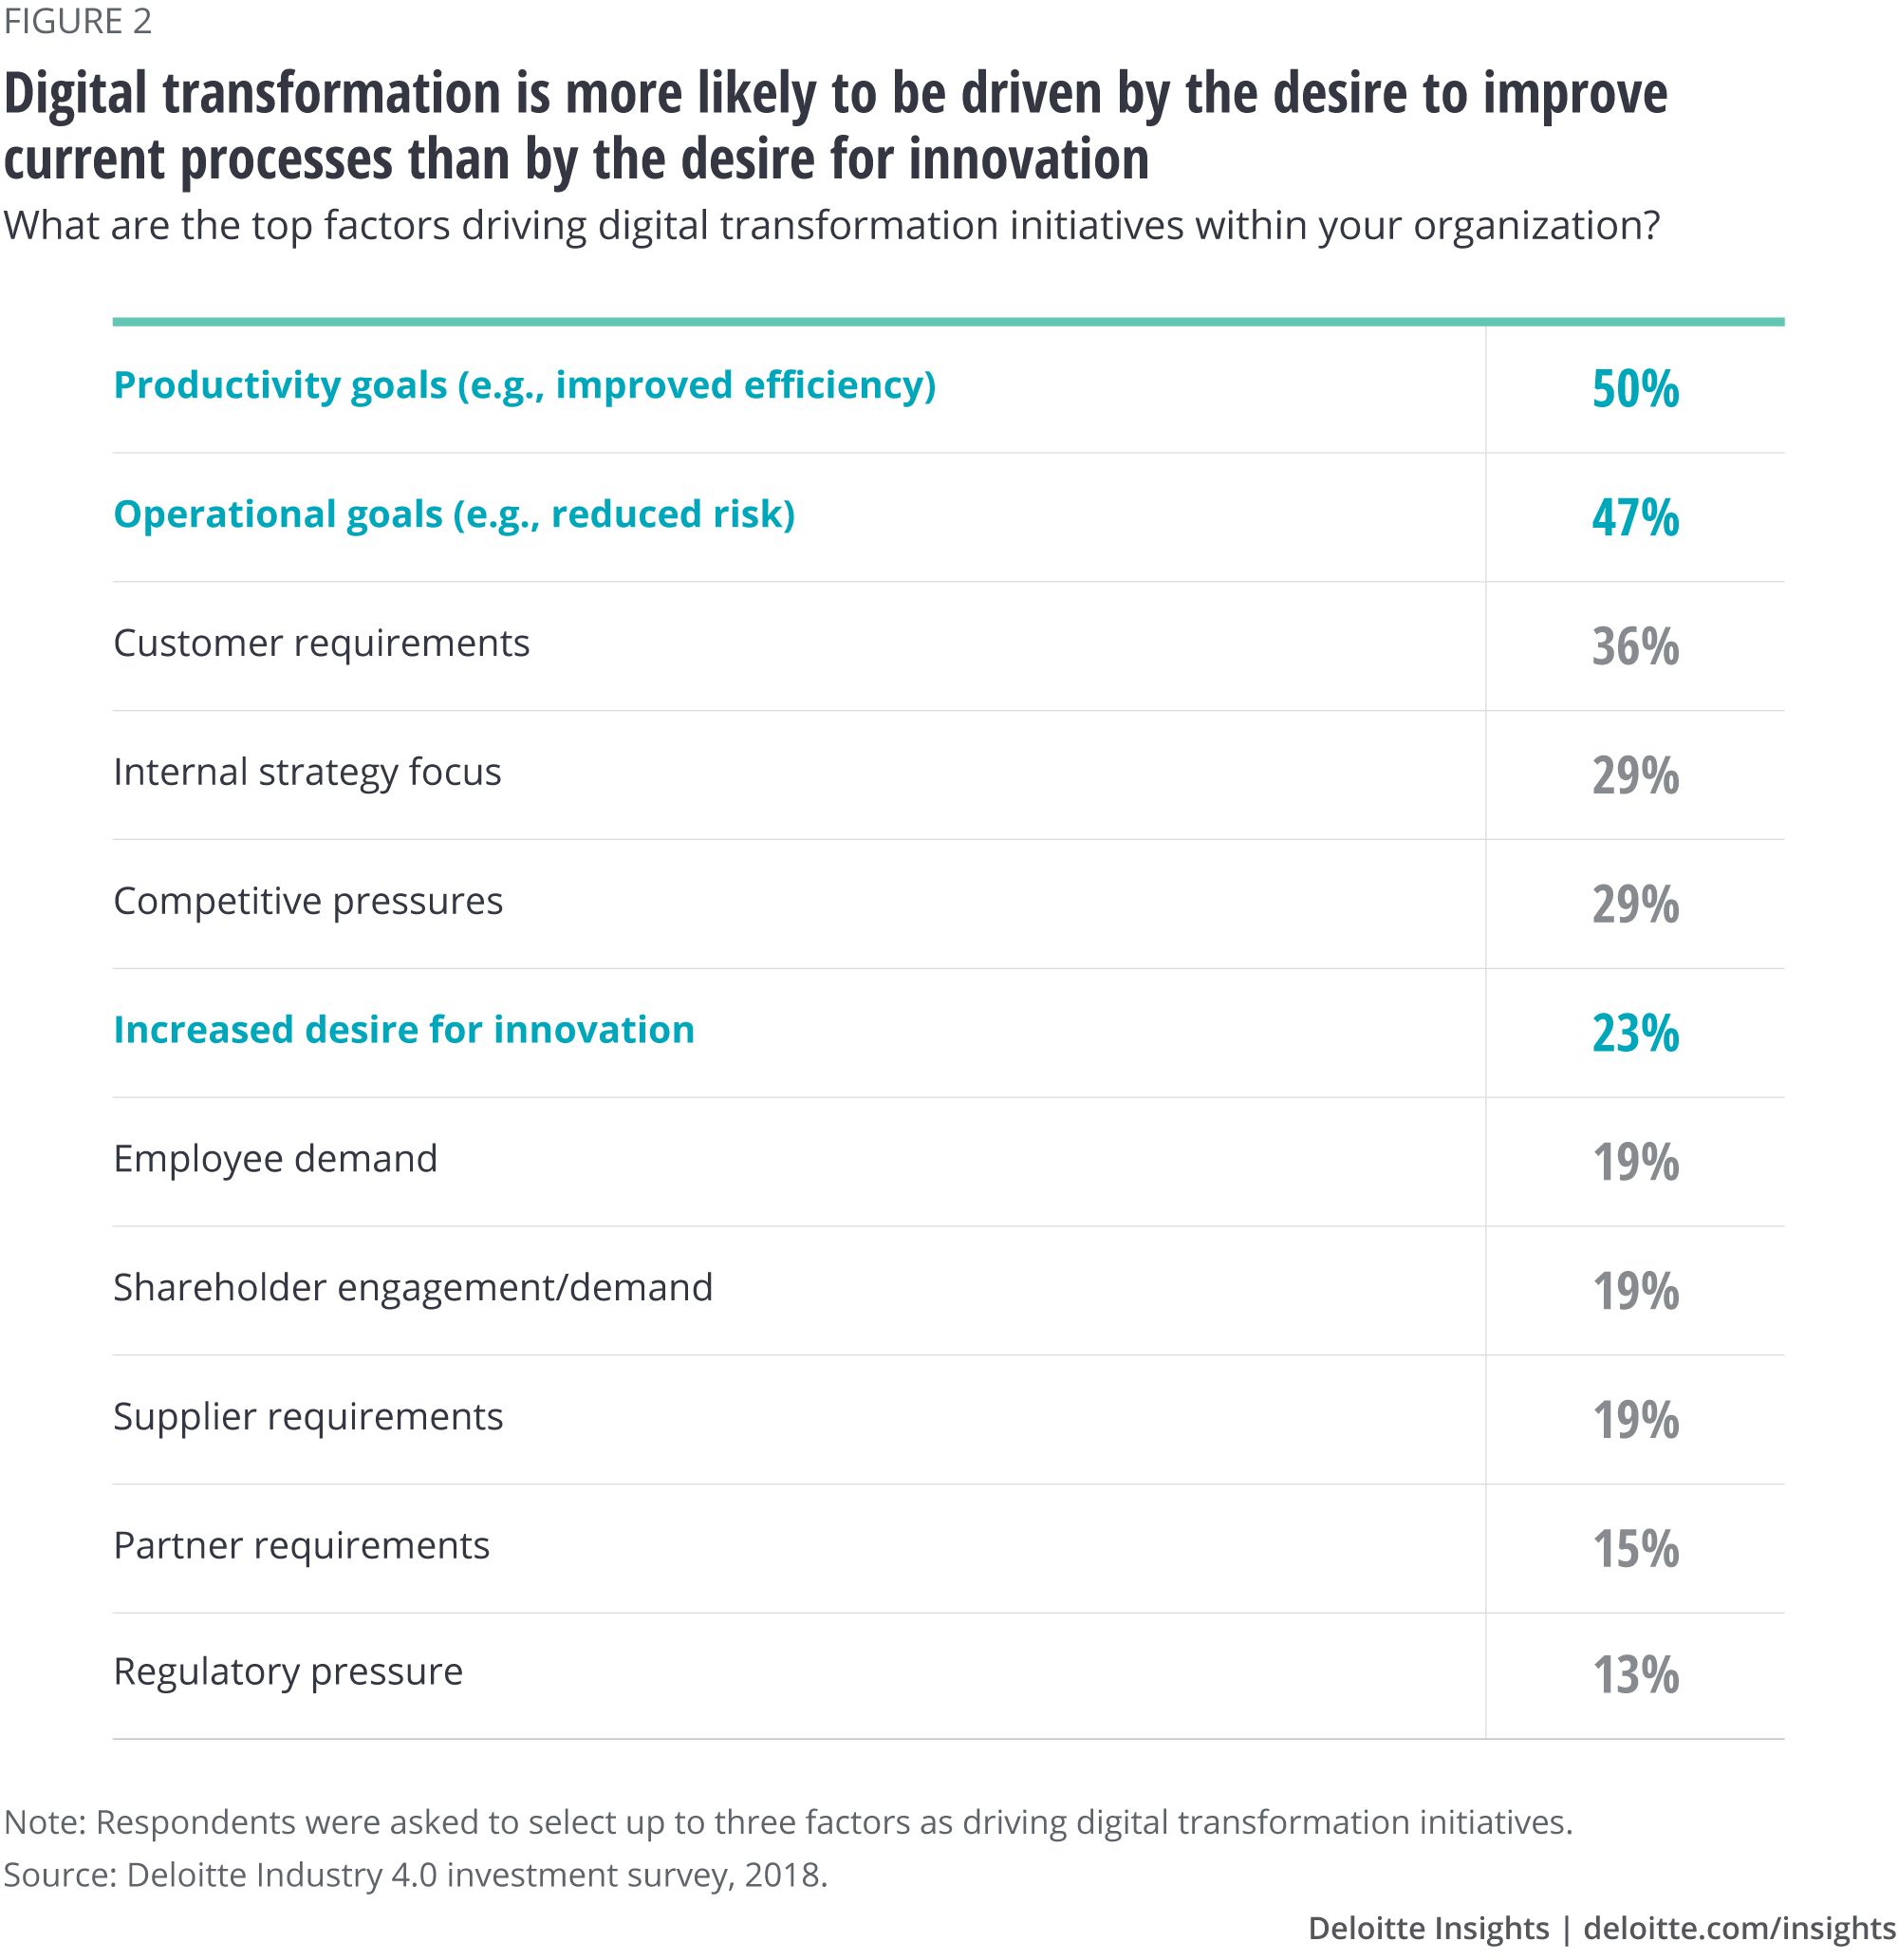 Digital transformation is more likely to be driven by the desire to improve current processes than by the desire for innovation